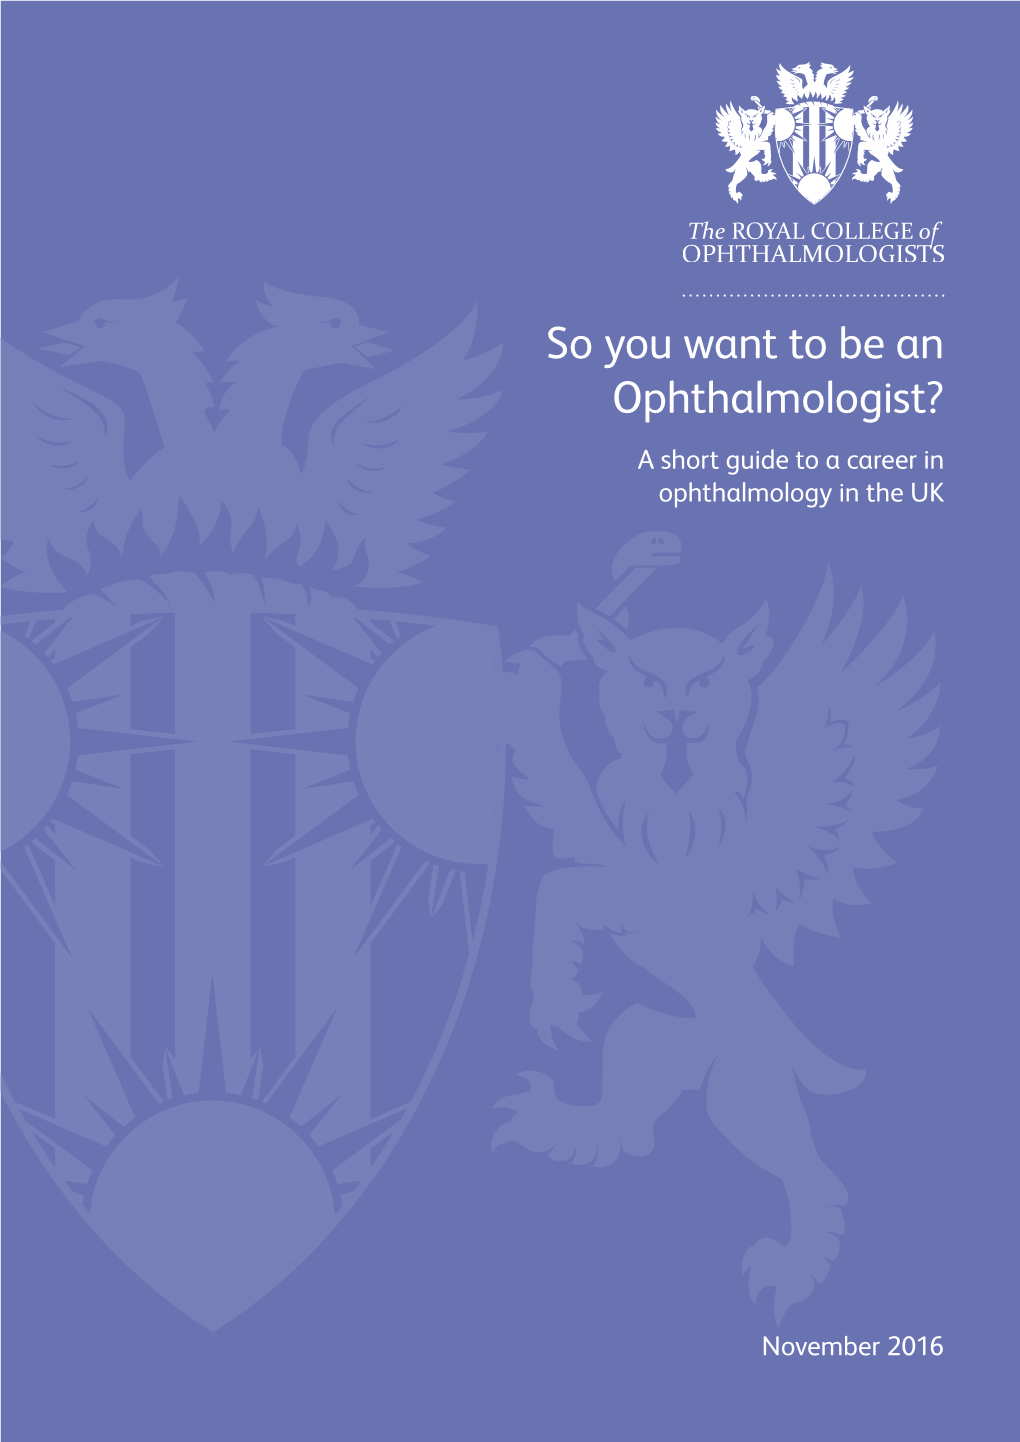 Short Guide to a Career in Ophthalmology in the UK